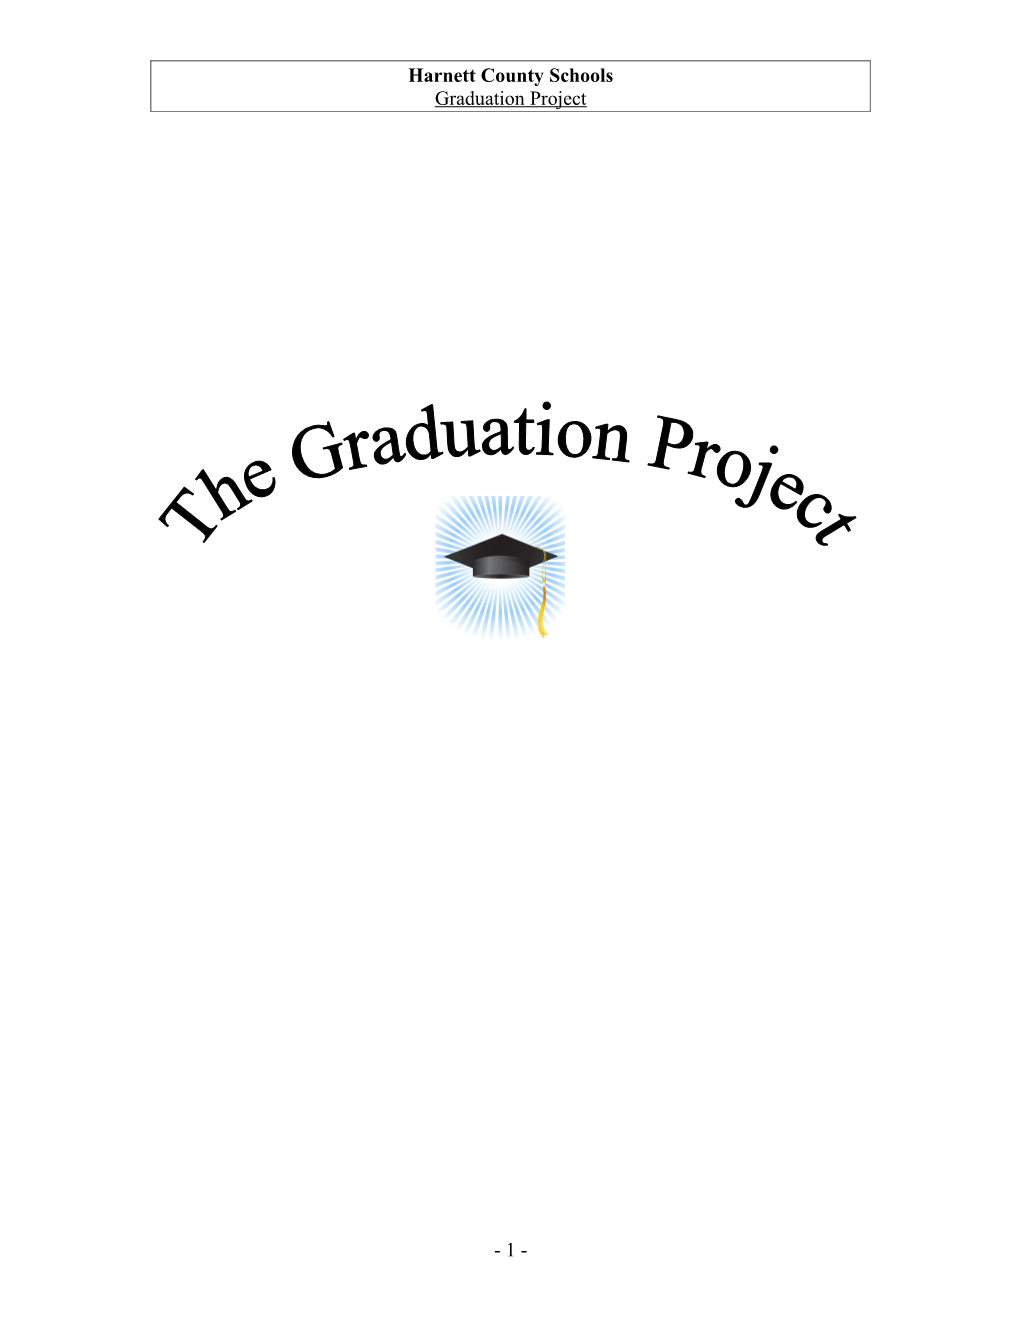 Brief History of the Graduation Project